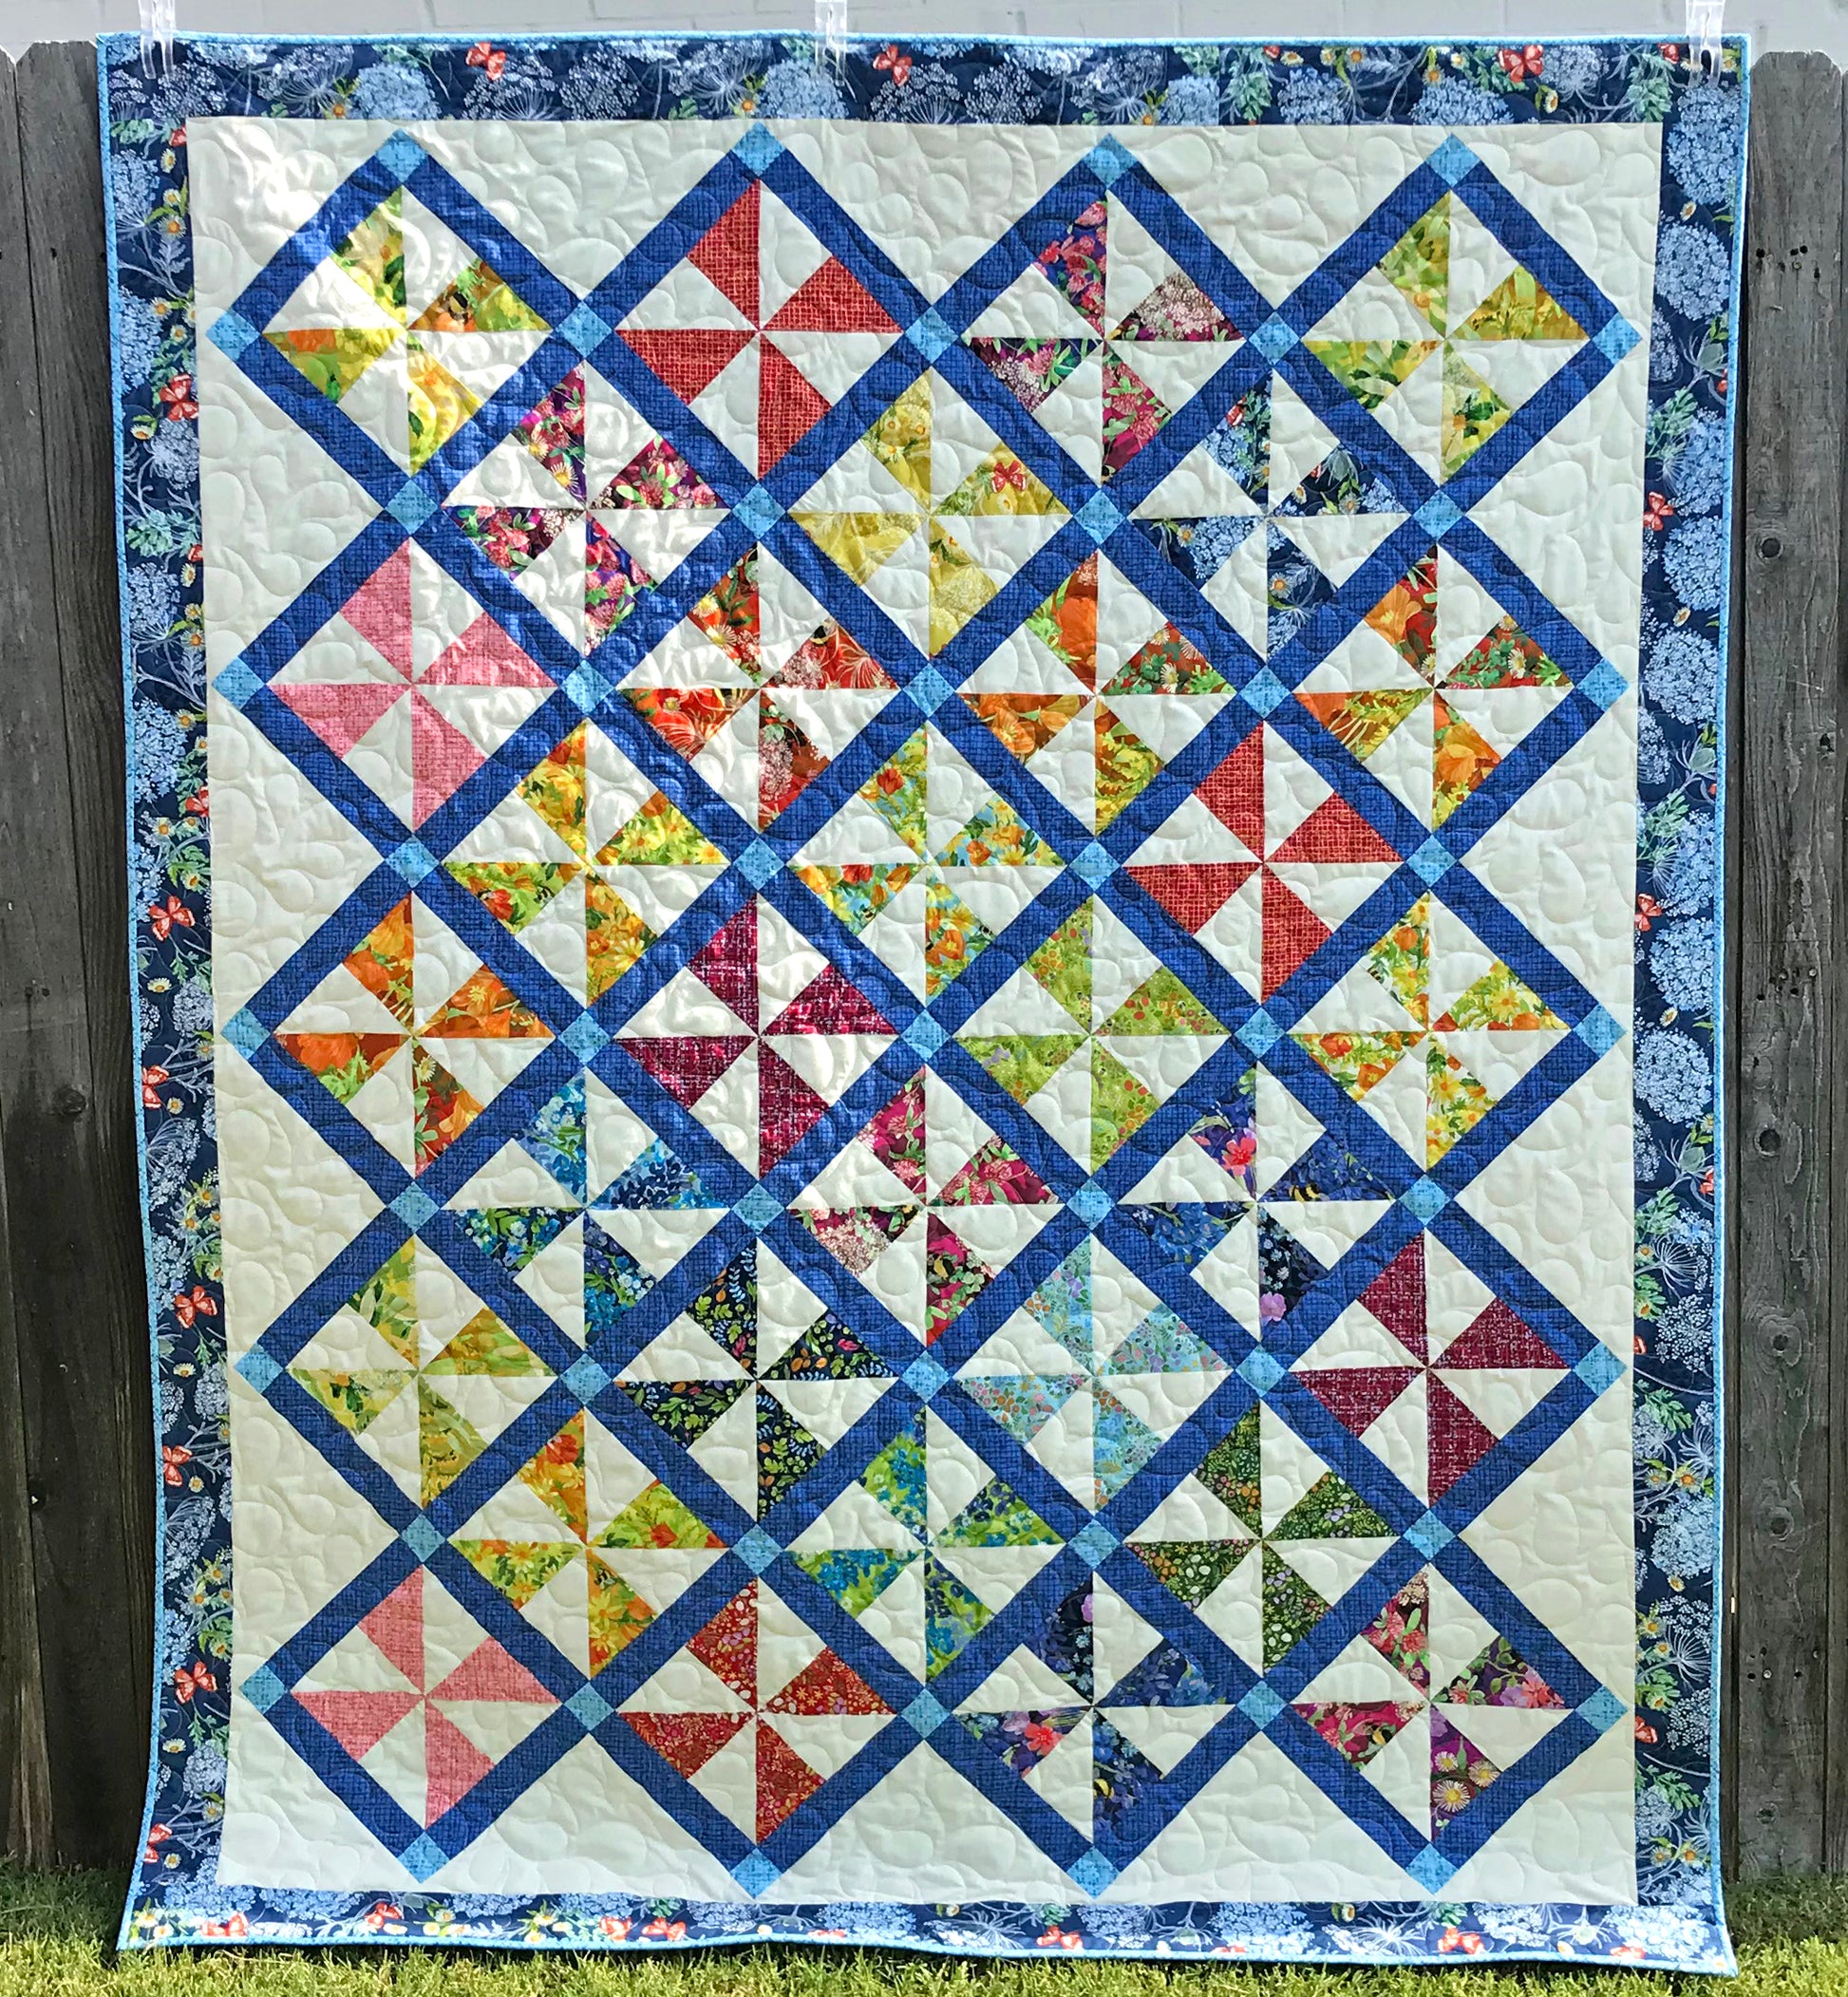 Pinwheel Parade quilt pattern featuring pinwheel blocks set on-point with sashing between the blocks and a floral border. Quilt is shown hanging on a fence.